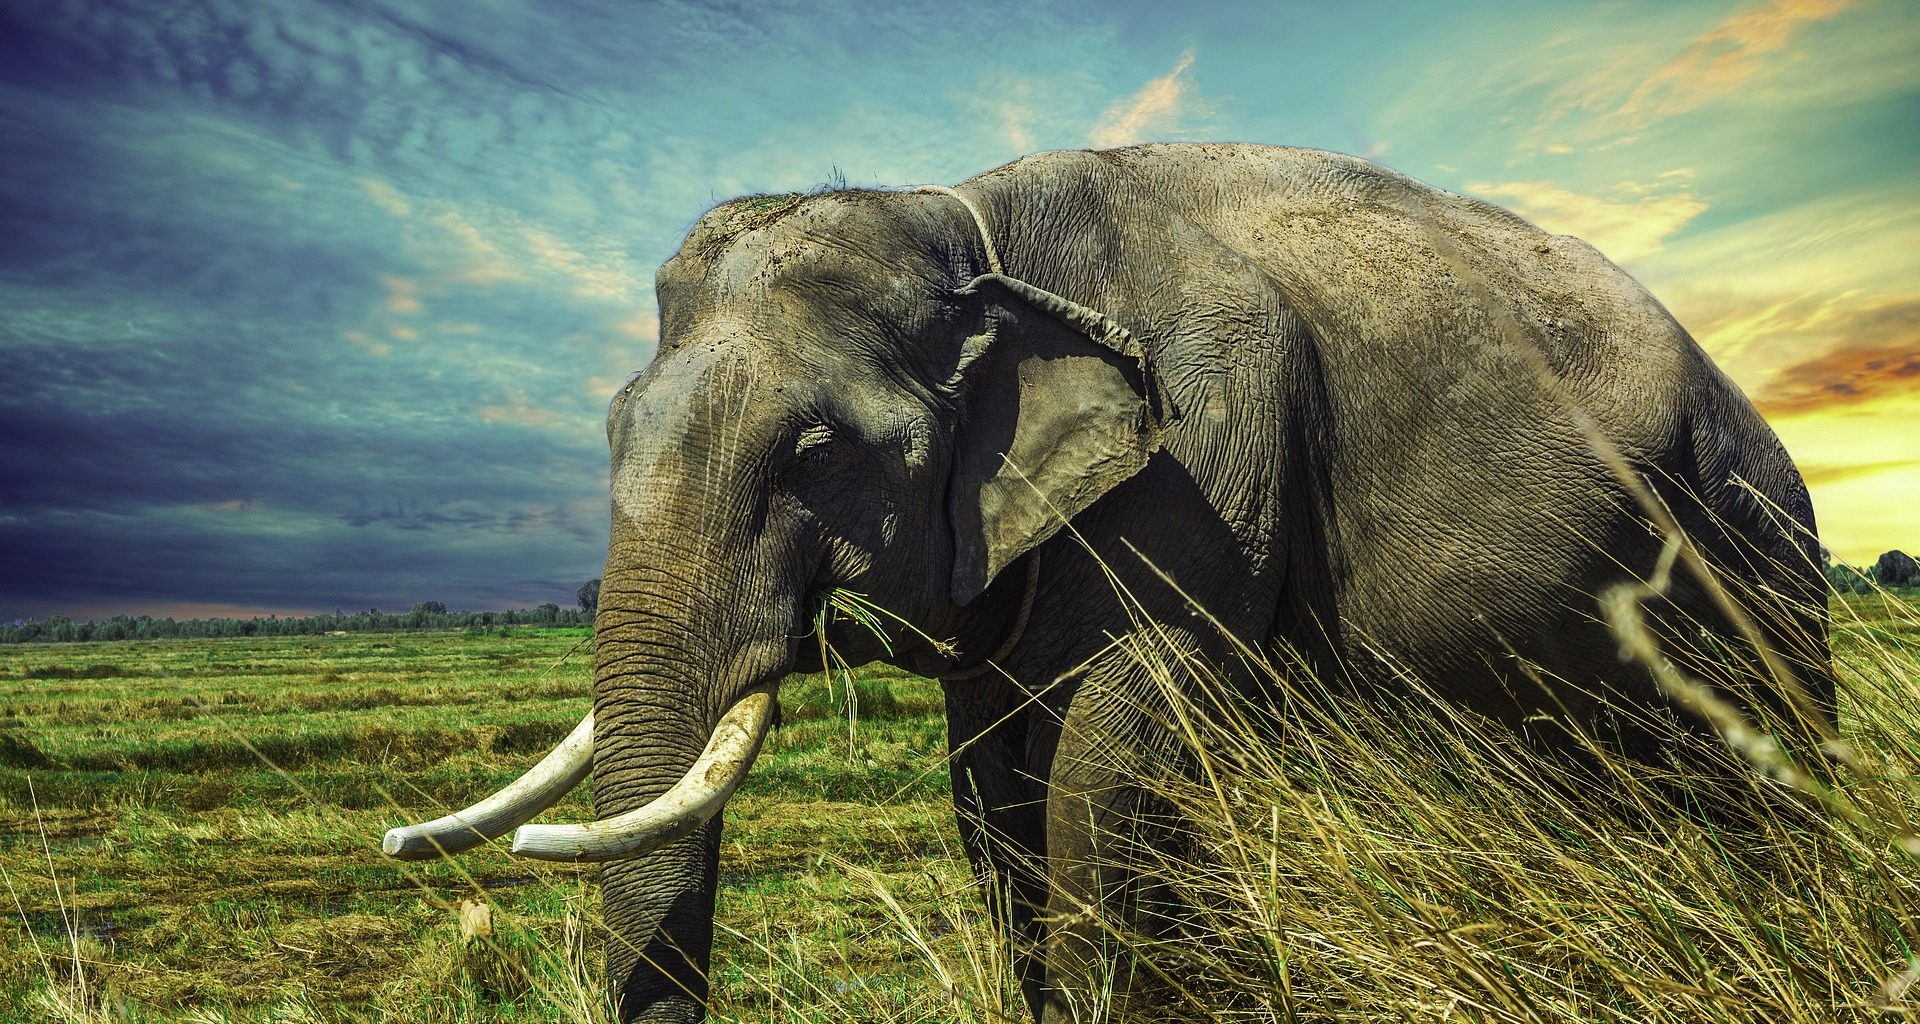 Elephant Facts - Featured Image1